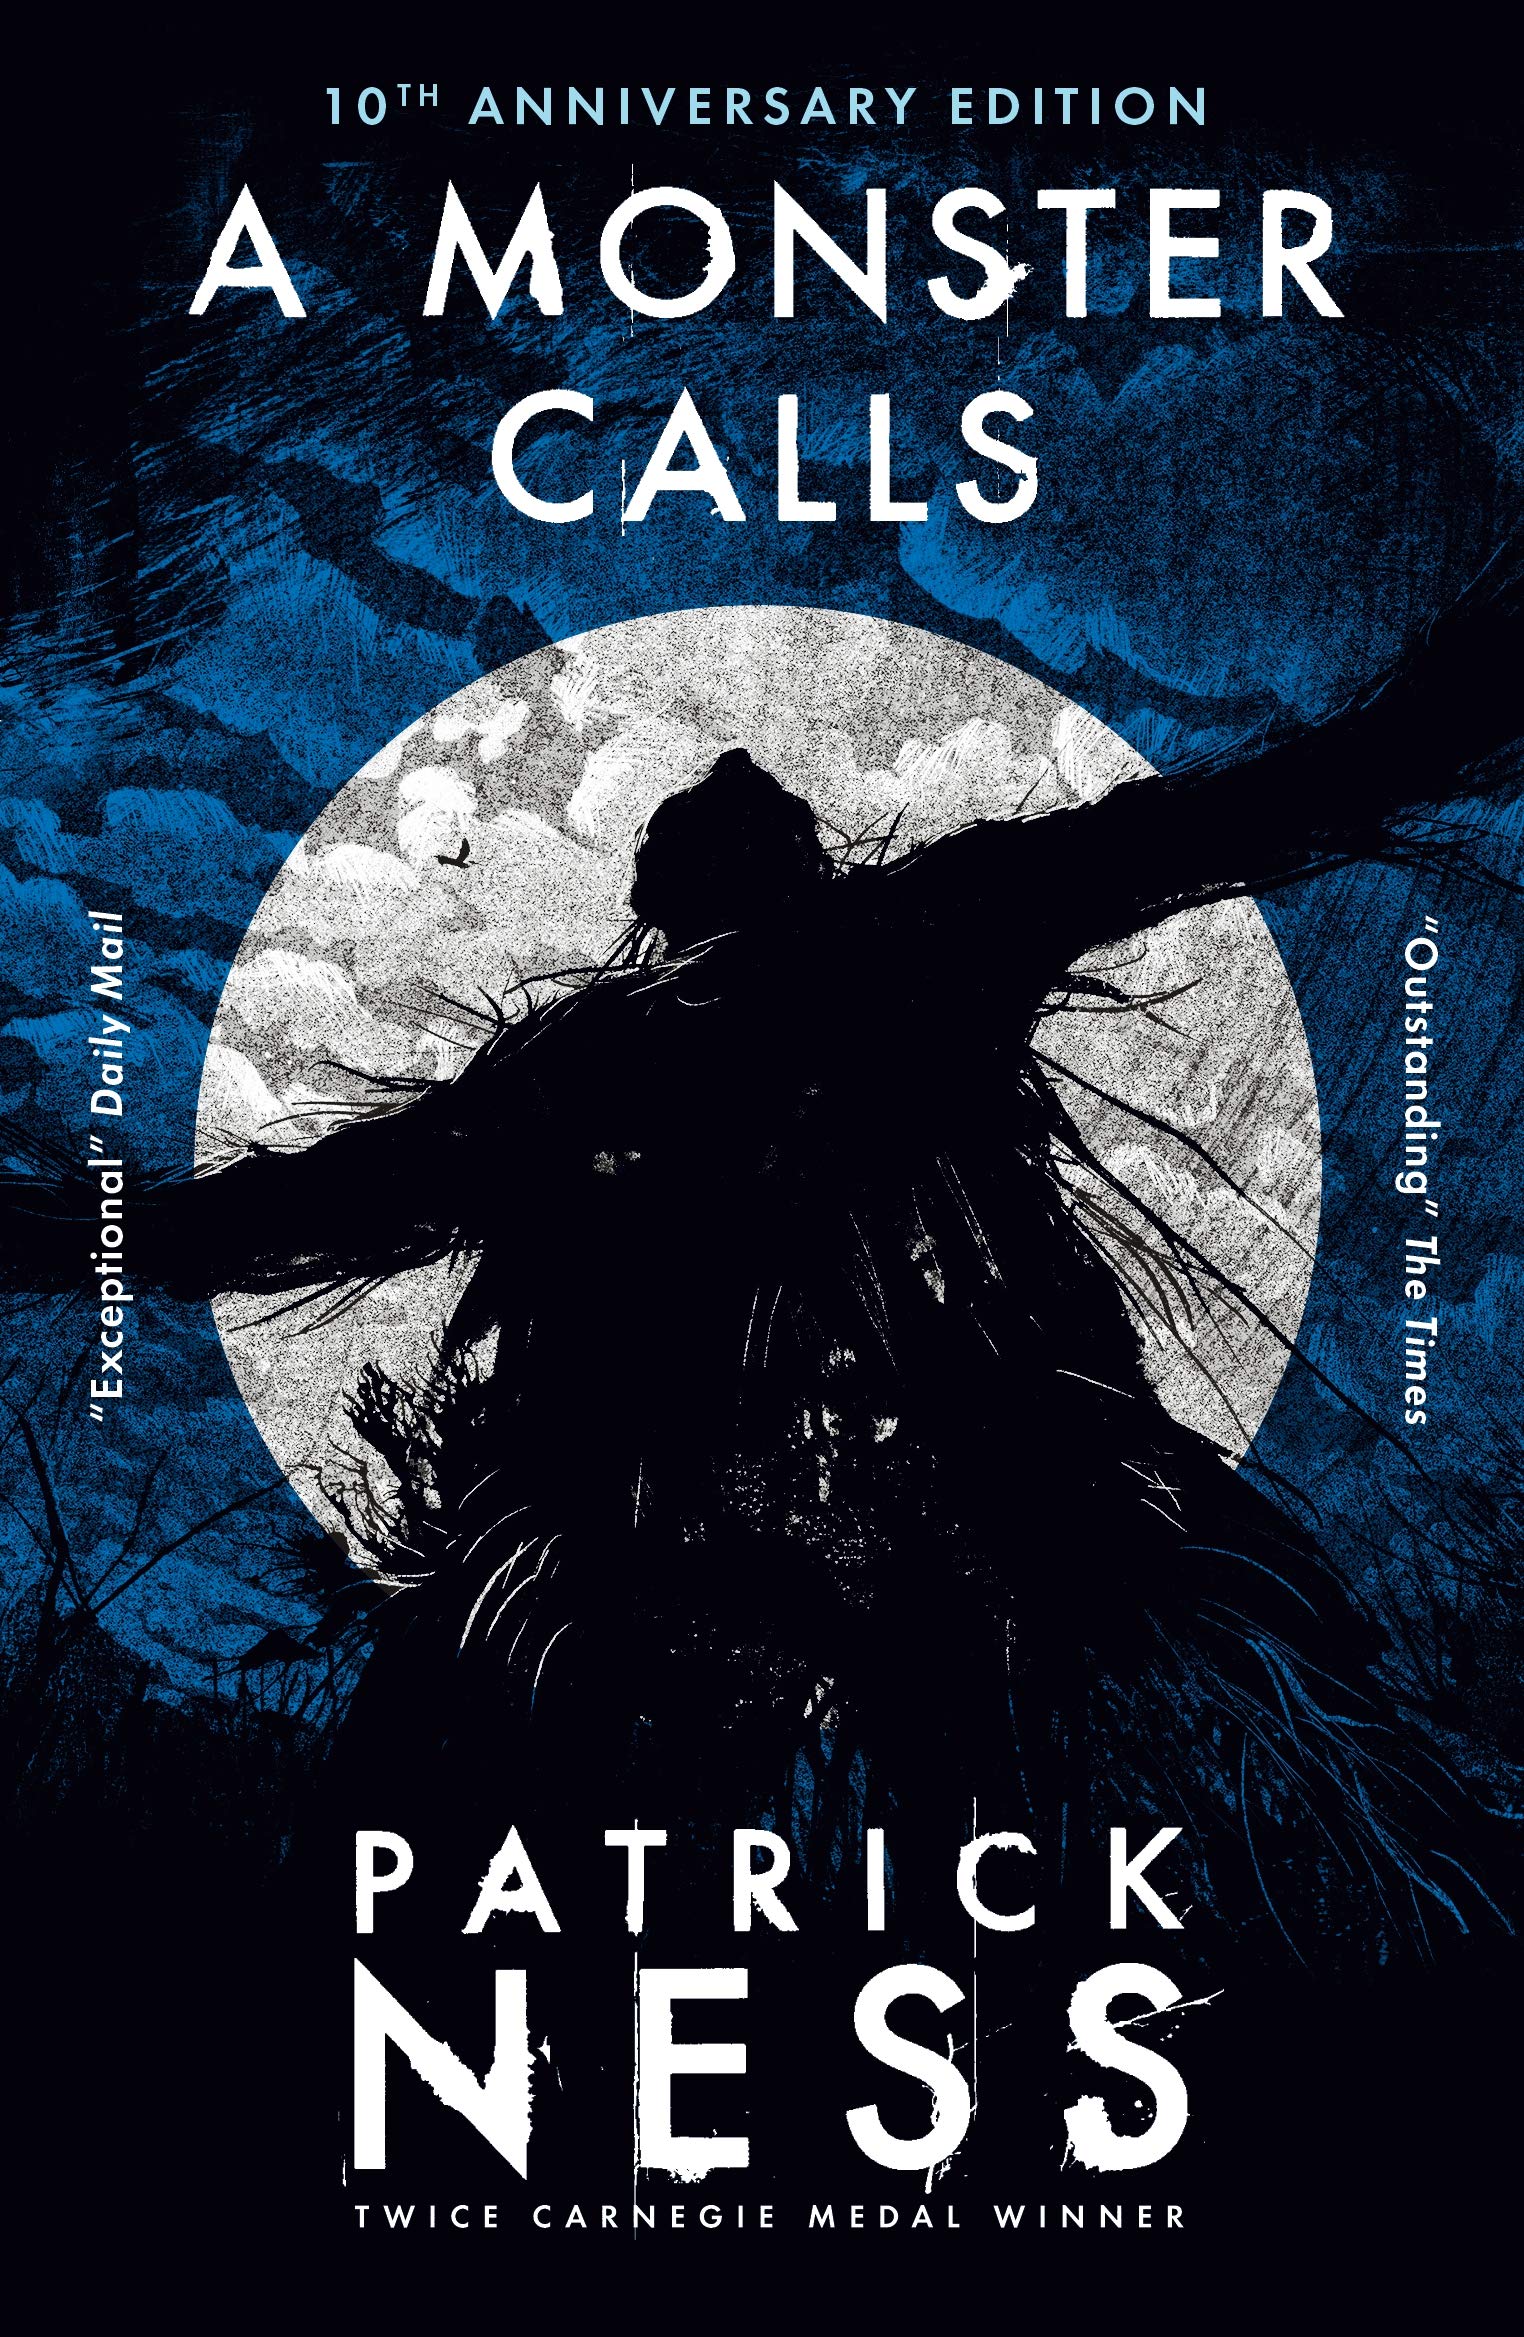 A Monster Calls | Patrick Ness, Siobhan Dowd